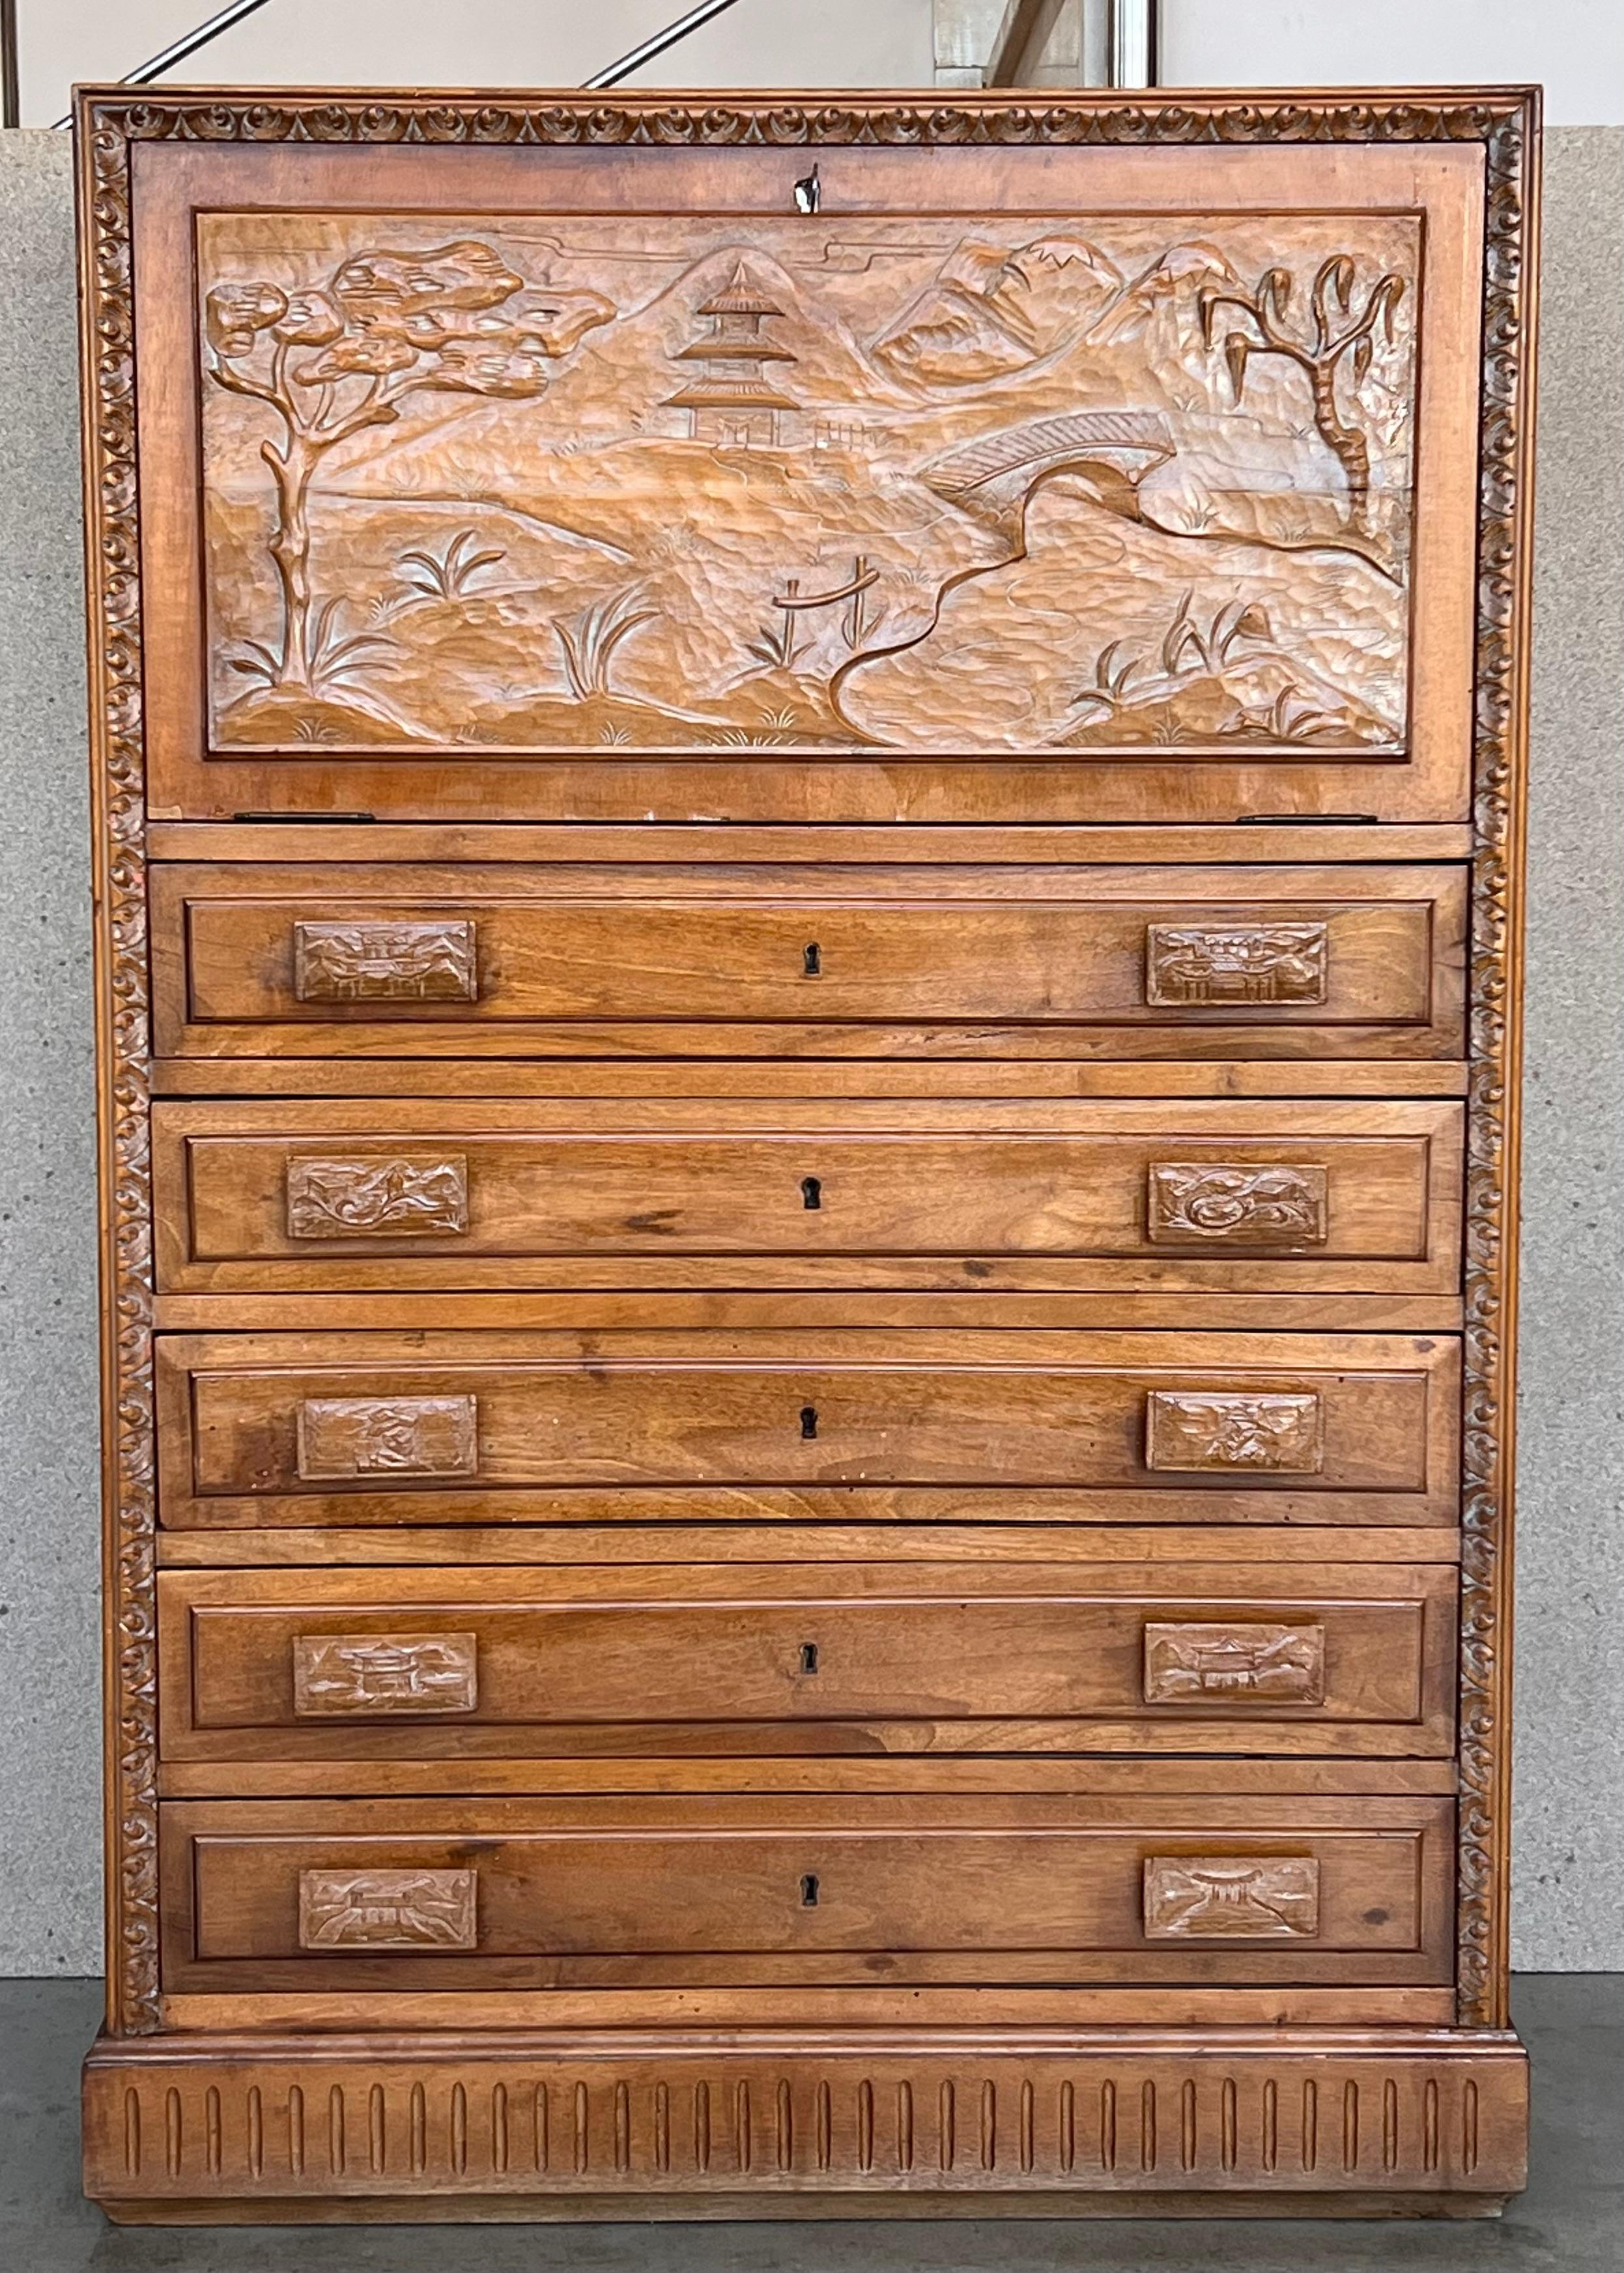 Mid 20th century walnut Spanish fall-front secretary with molded carvings in drawers and doors.


Measures: Height from the floor to the open leaf: 32.40in.